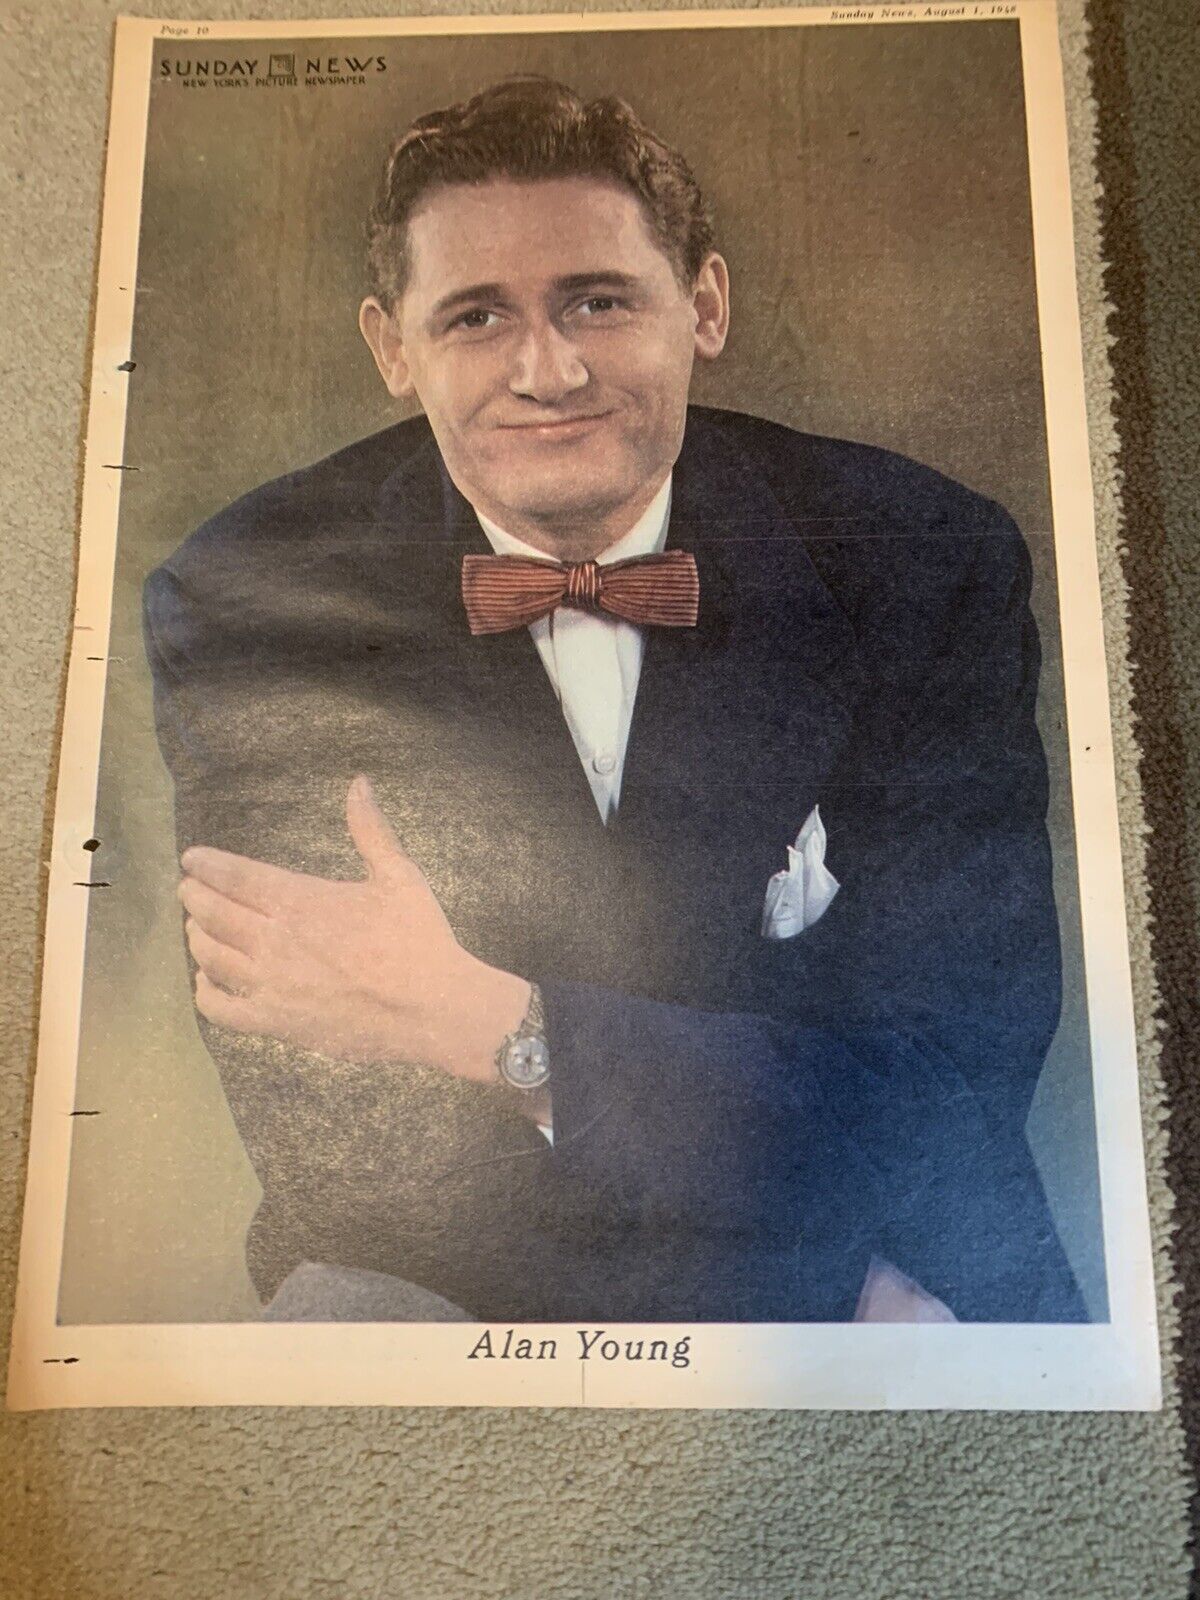 ALAN YOUNG original color portrait SUNDAY NEWS 8/1/48 OLD HOLLYWOOD 10.5X14.5